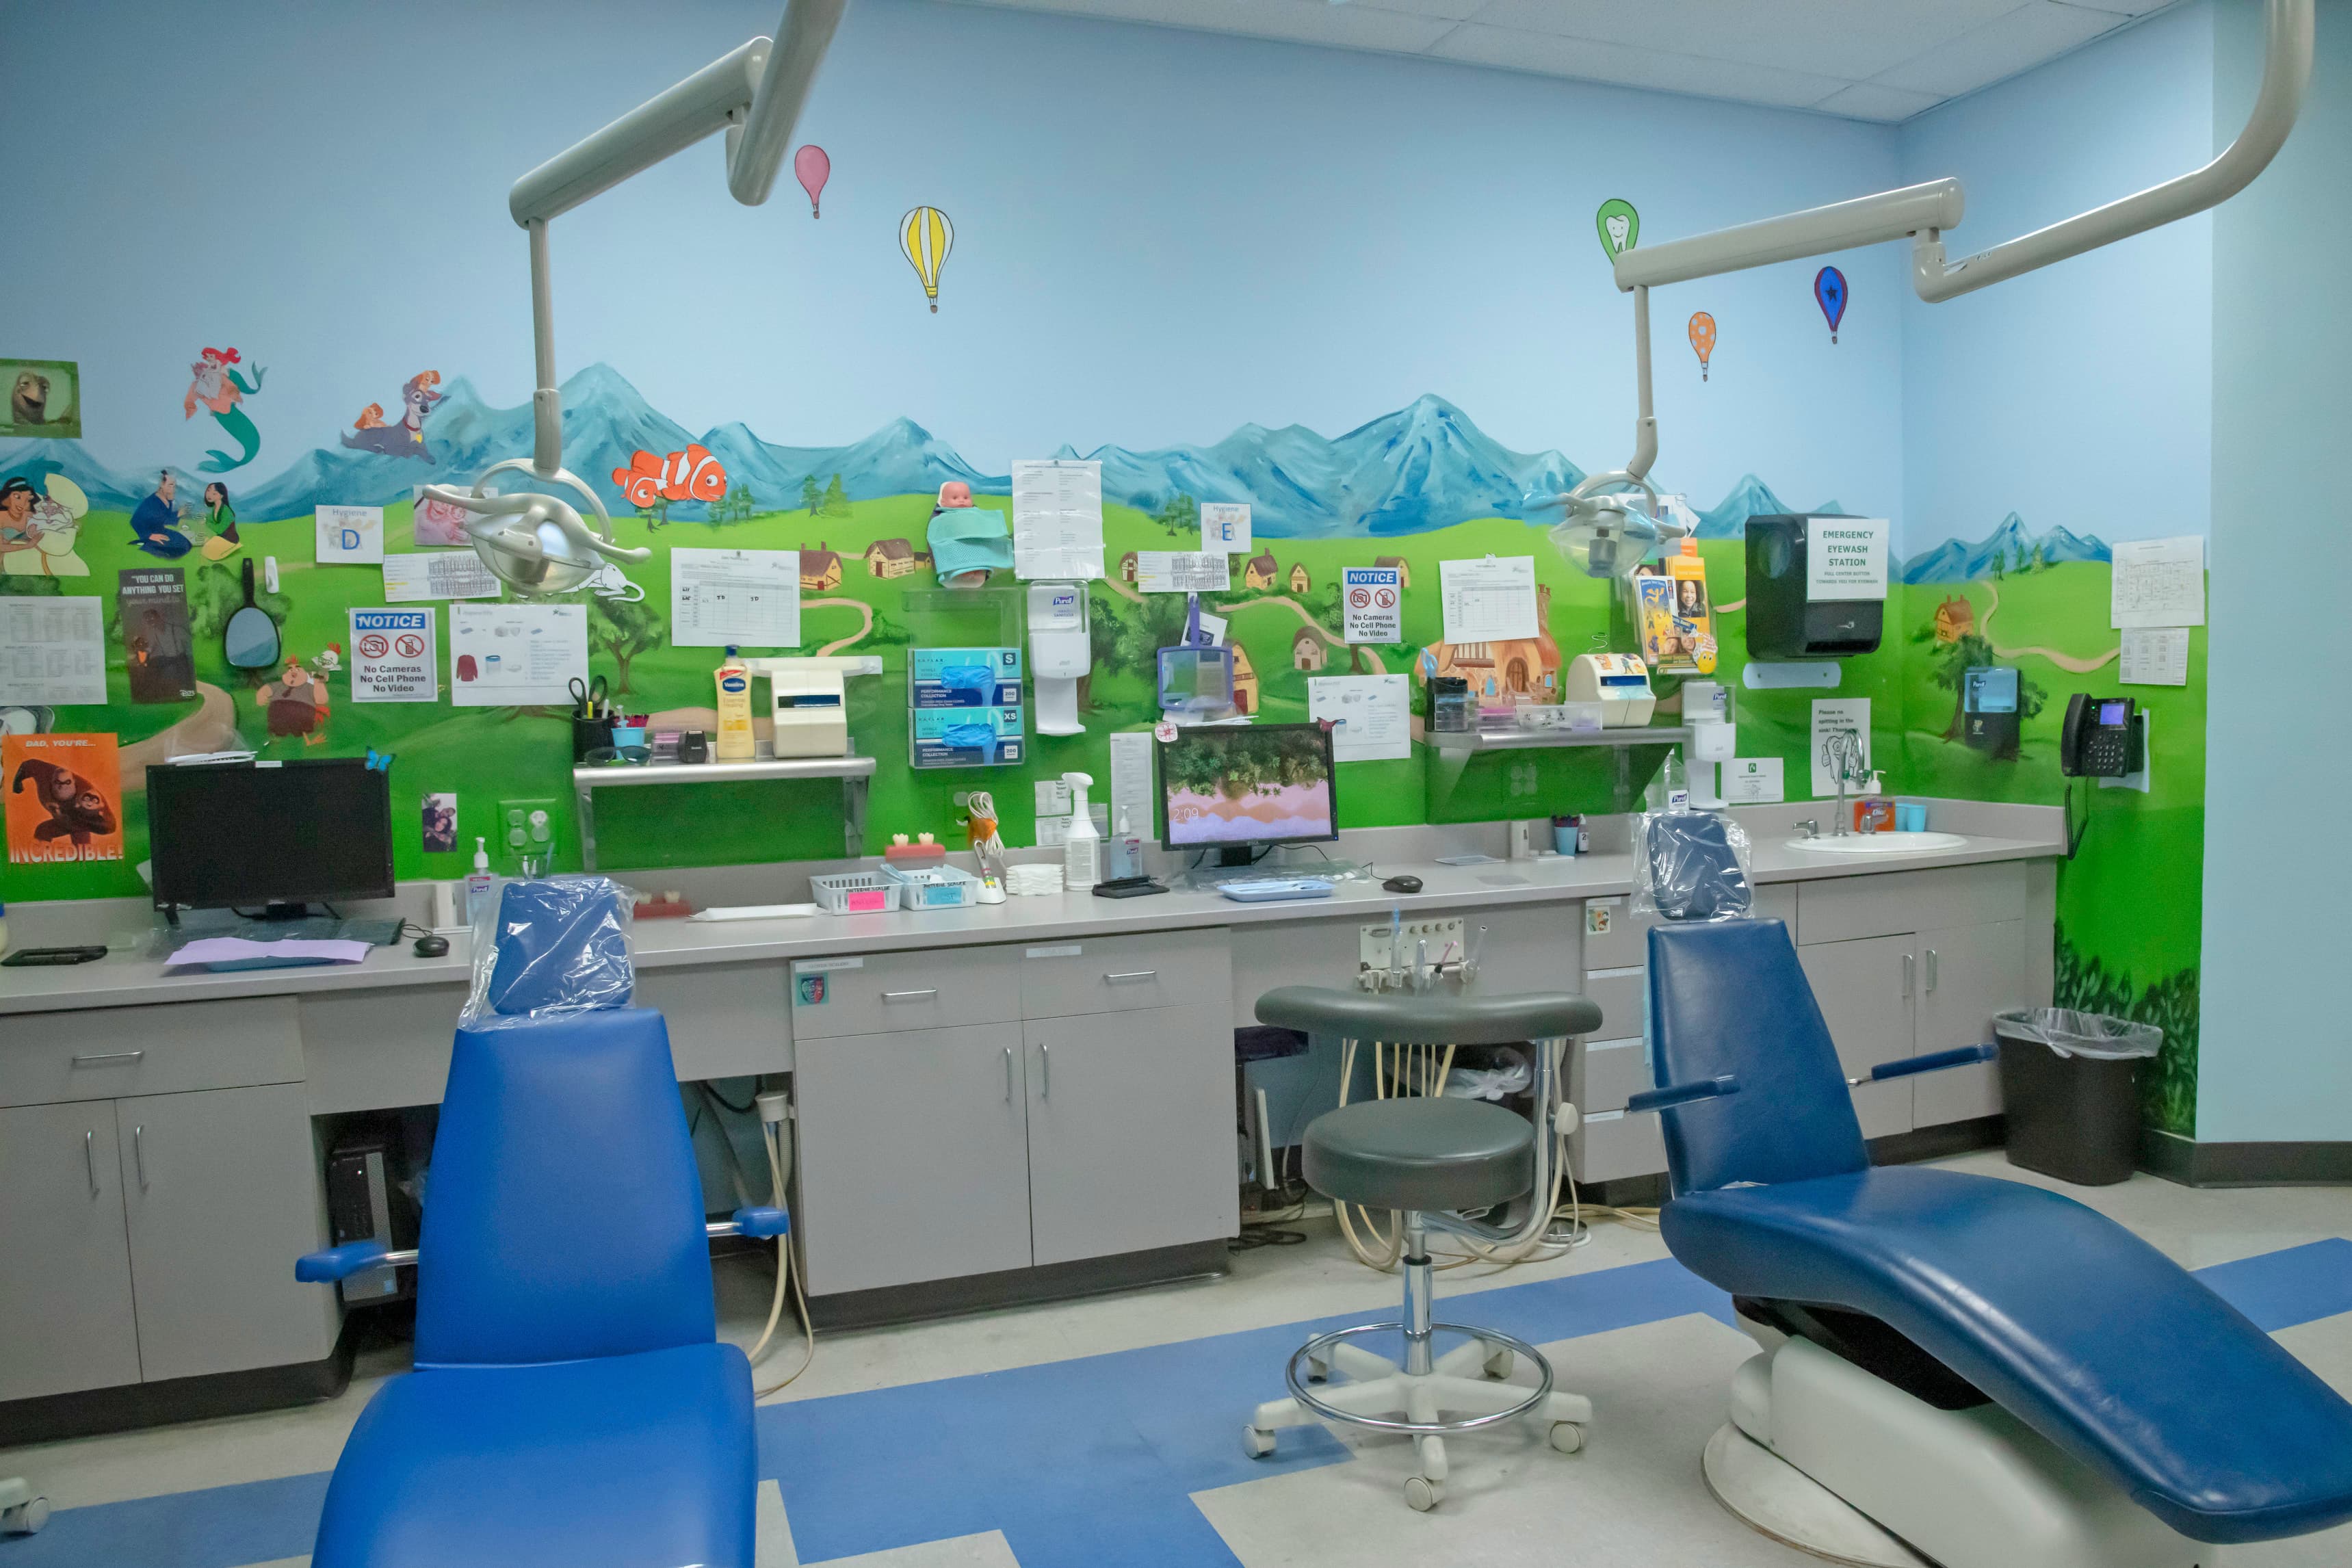 operatory room for pediatric dentistry with two dental chairs